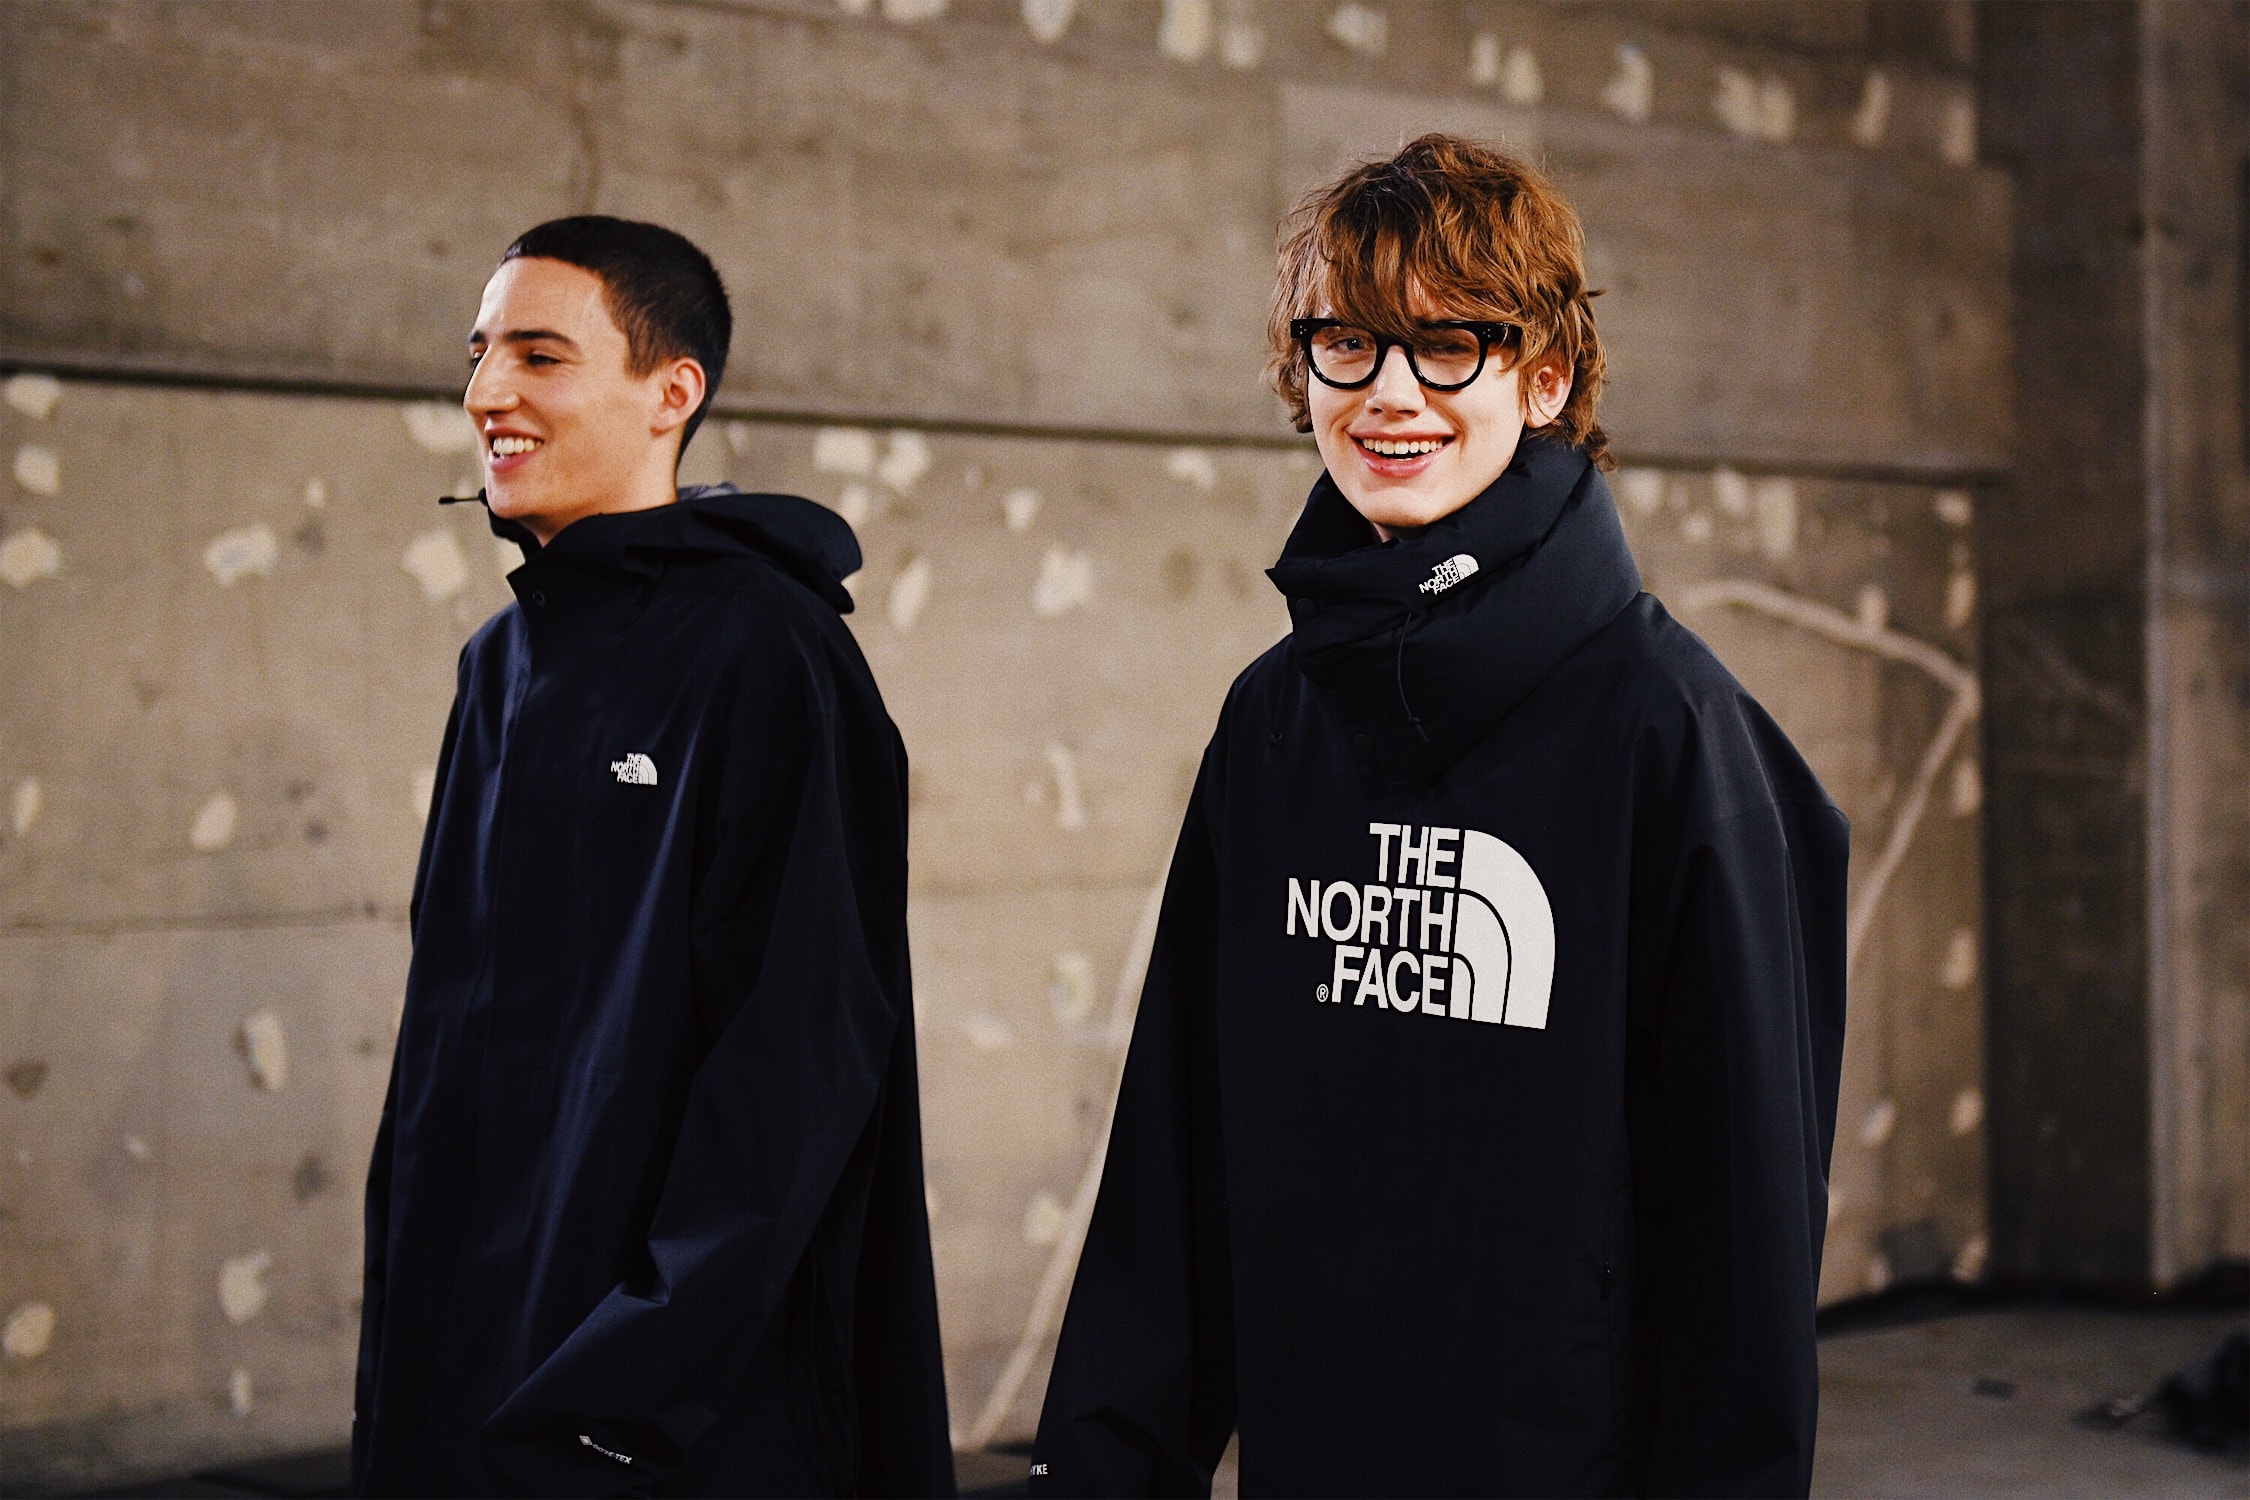 hyke the north face fall winter backstage photos fashion apparel clothing merchandise fashion style 